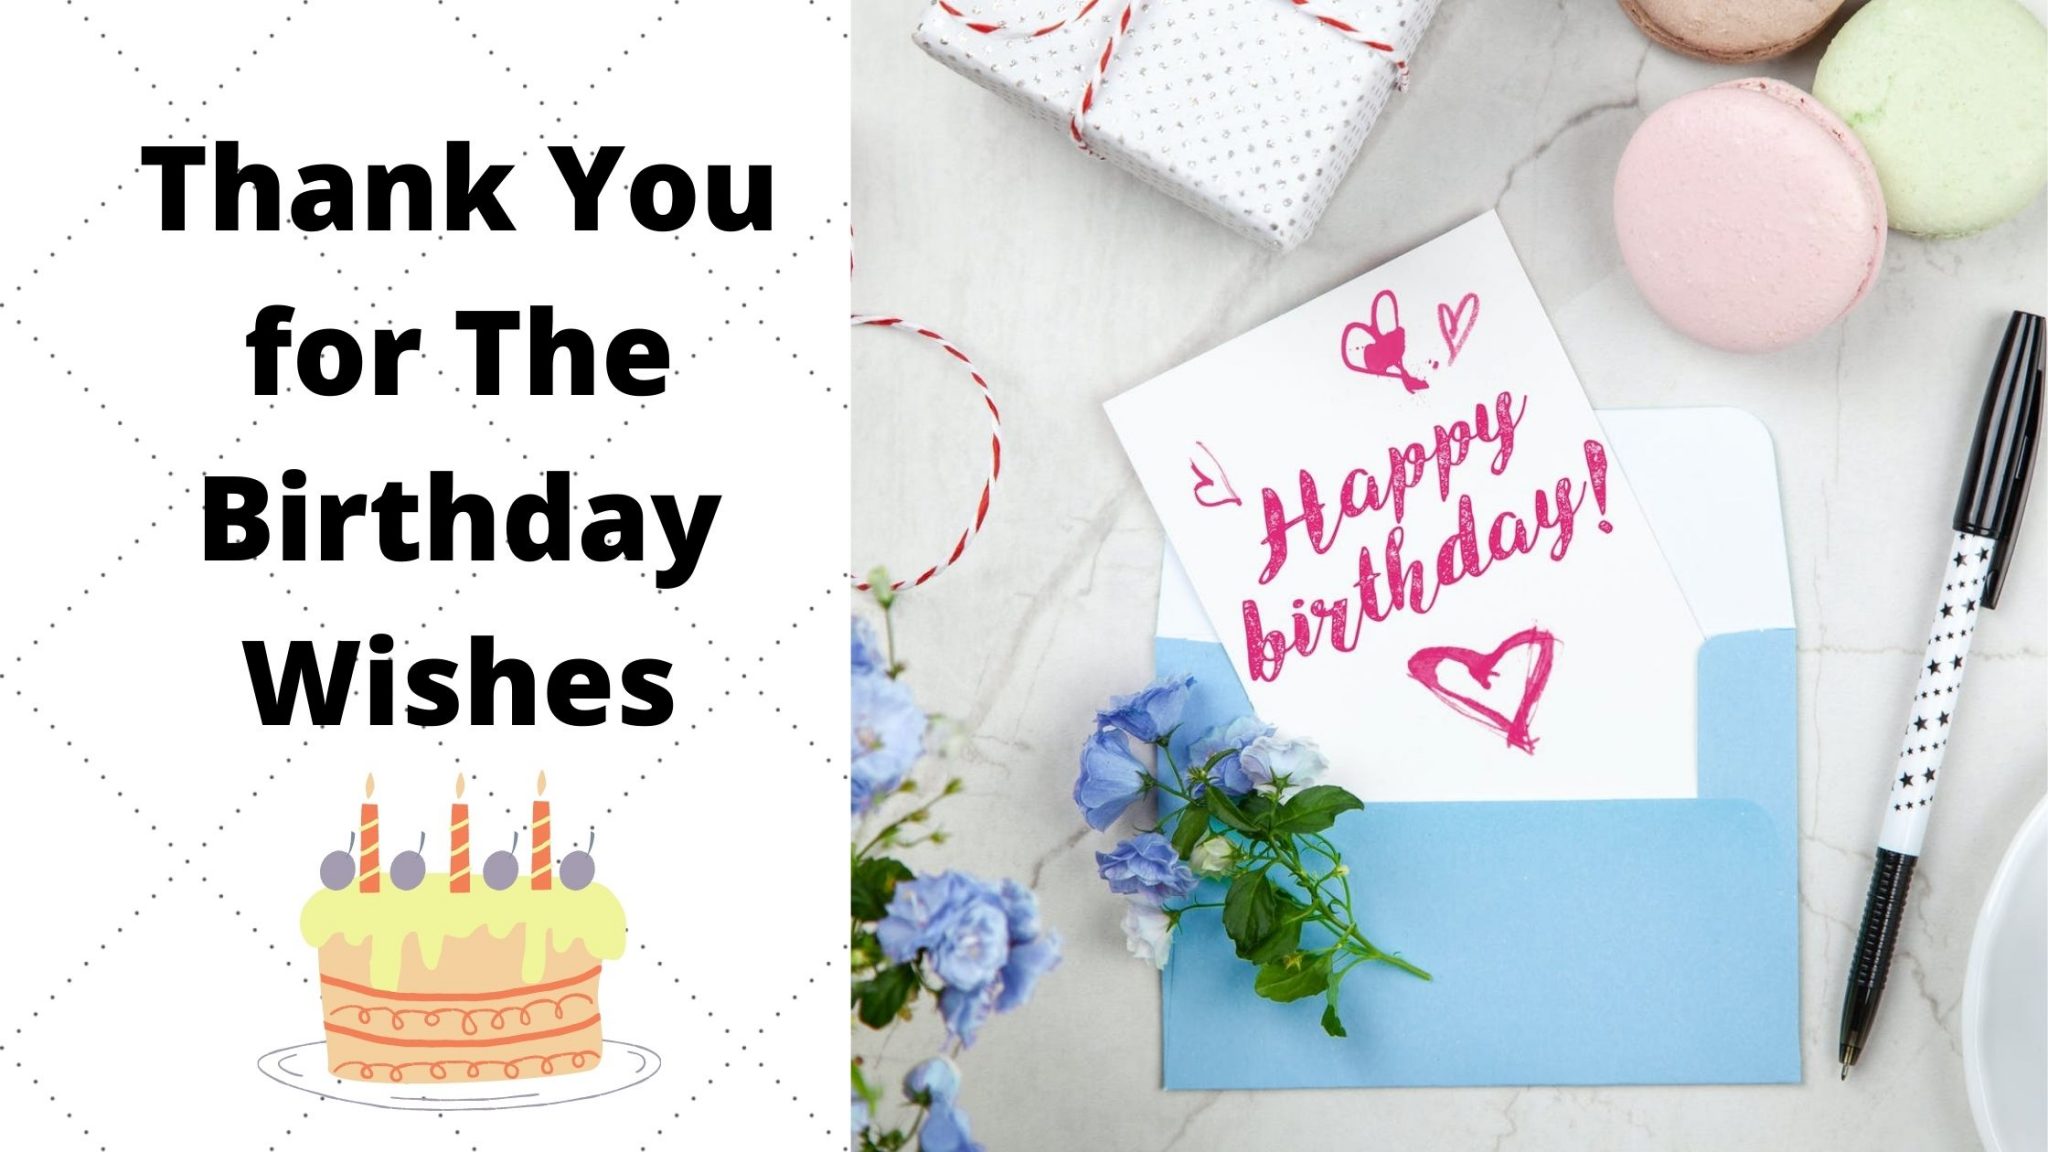 Thank You For The Birthday Wishes - The Thank You Notes Blog